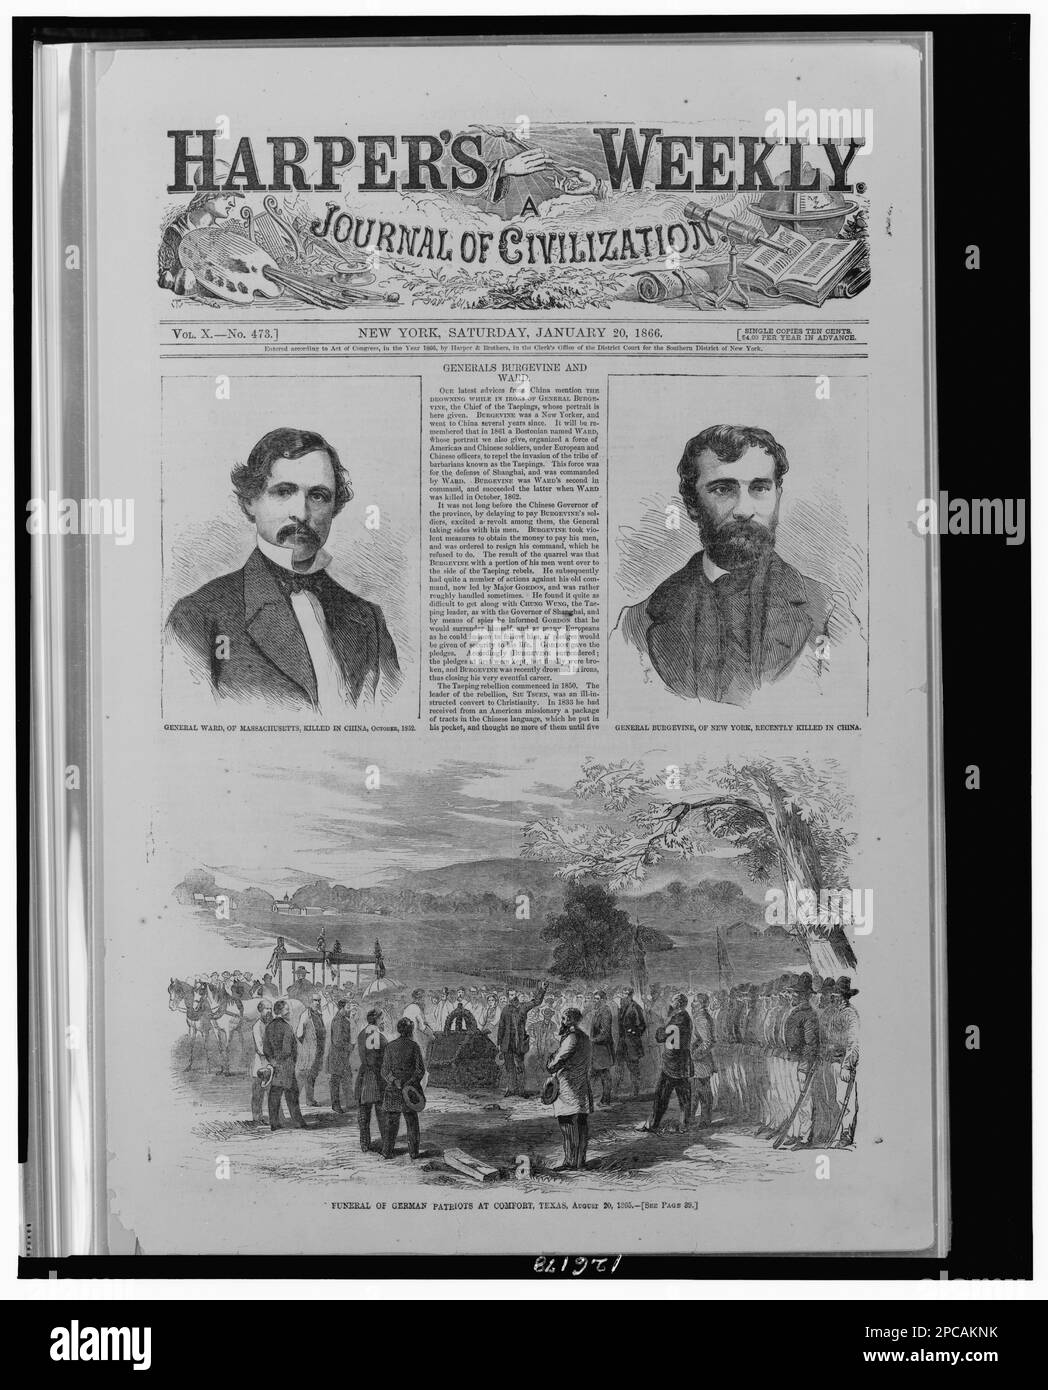 General Ward, of Massachusetts, killed in China, October, 1862 General Burgevine, of New York, recently killed in China ; Funeral of German patriots at Comfort, Texas, August 20, 1865.. Three illustrations in: Harper's weekly, v. 10, no. 473 (1866 Jan. 20), p. 33. Ward, Frederick Townsend, 1831-1862, United States, History, Civil War, 1861-1865, Cemeteries, Funeral rites & ceremonies, Texas, Comfort, 1860-1870, China, History, Taiping Rebellion, 1850-1864, Casualties, American. Stock Photo